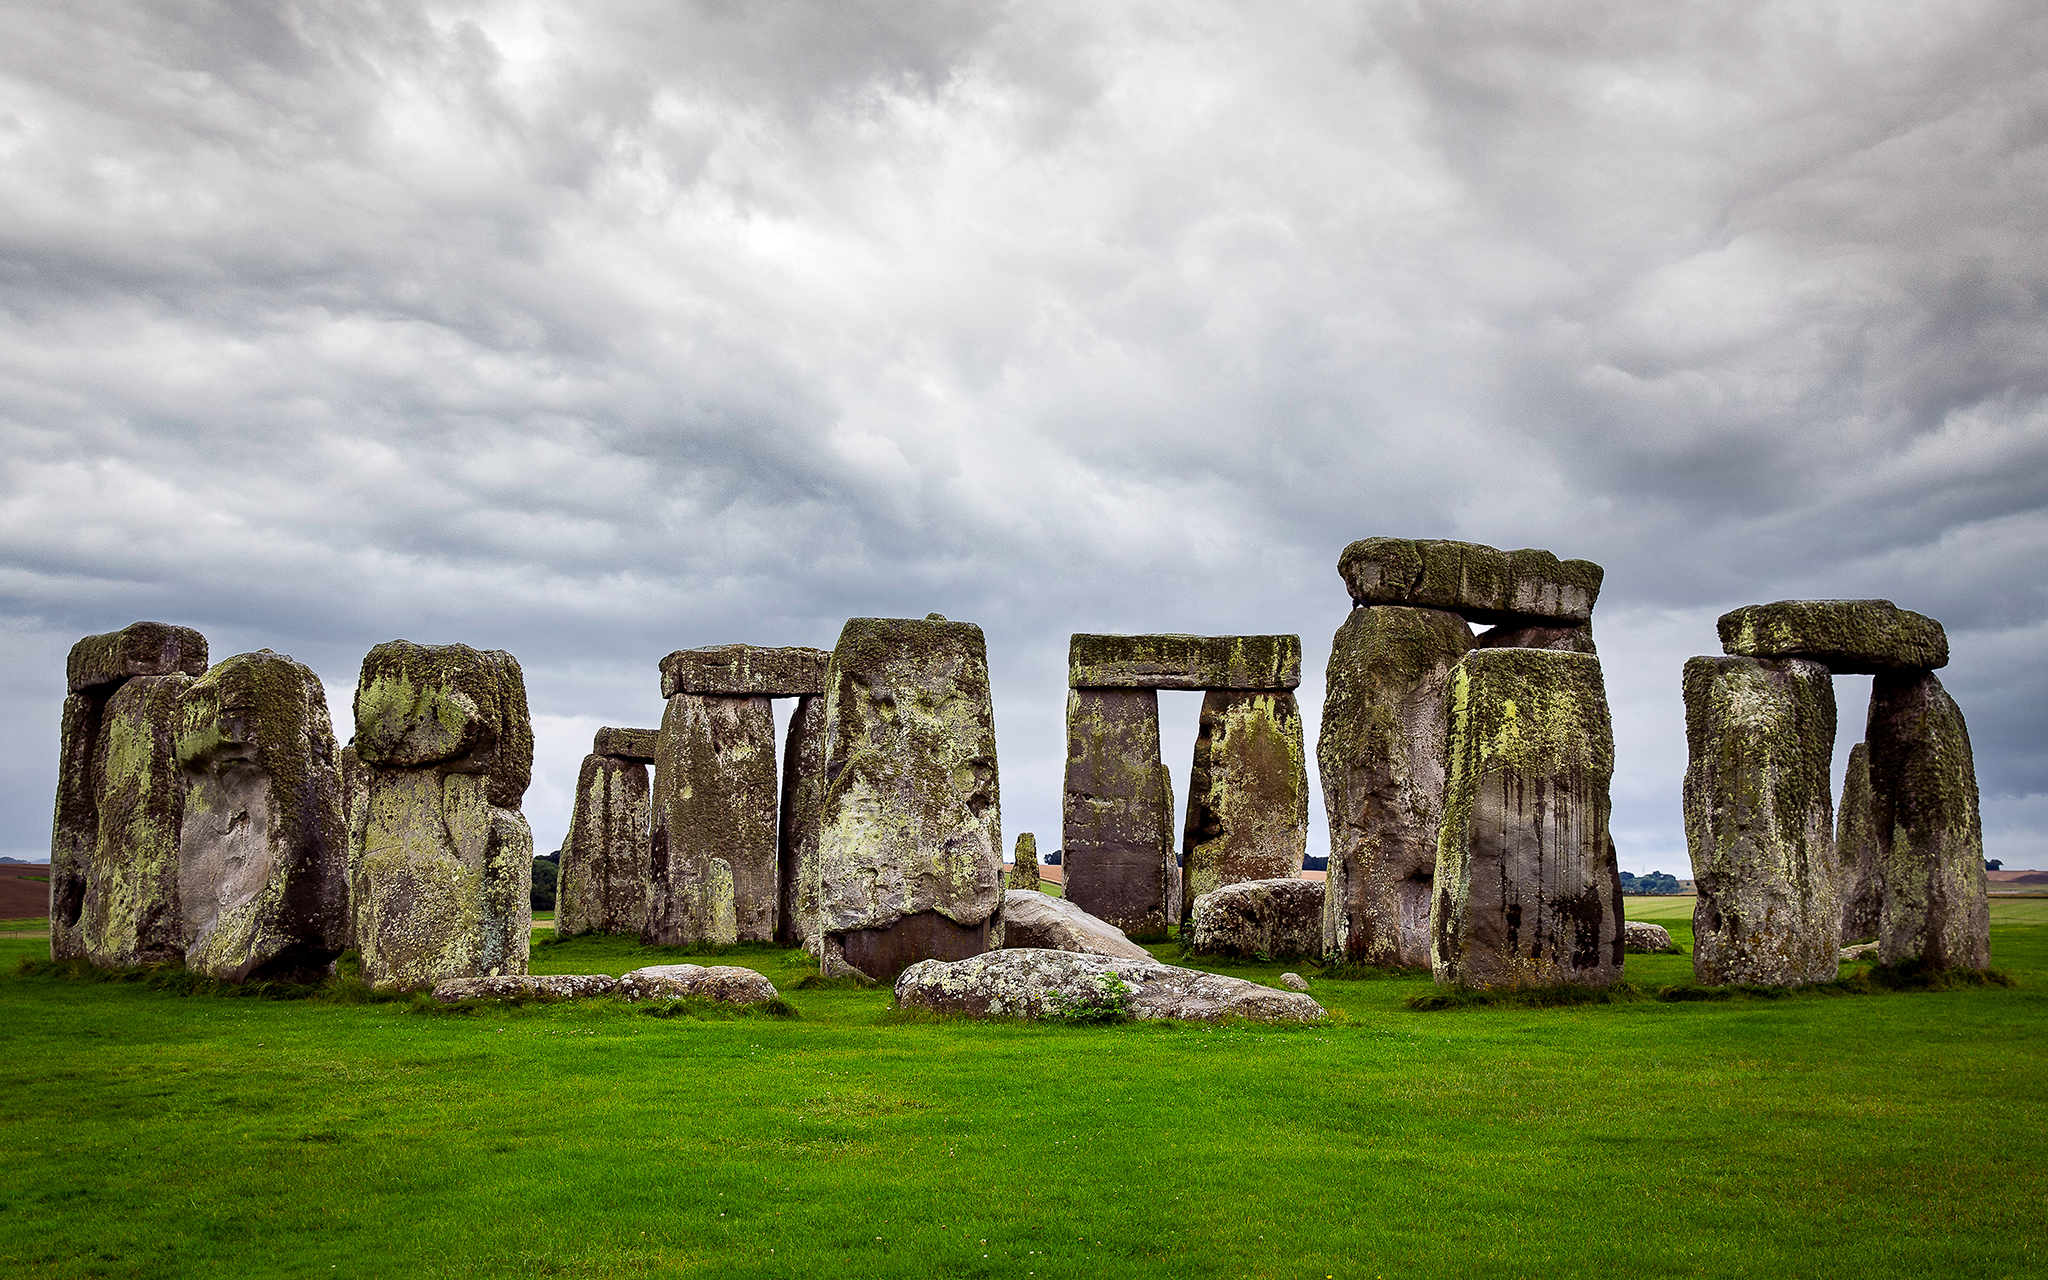 Cloudy day at the Stonehenge in Salisbury Plain England taken by Stefani Ciotti Photography